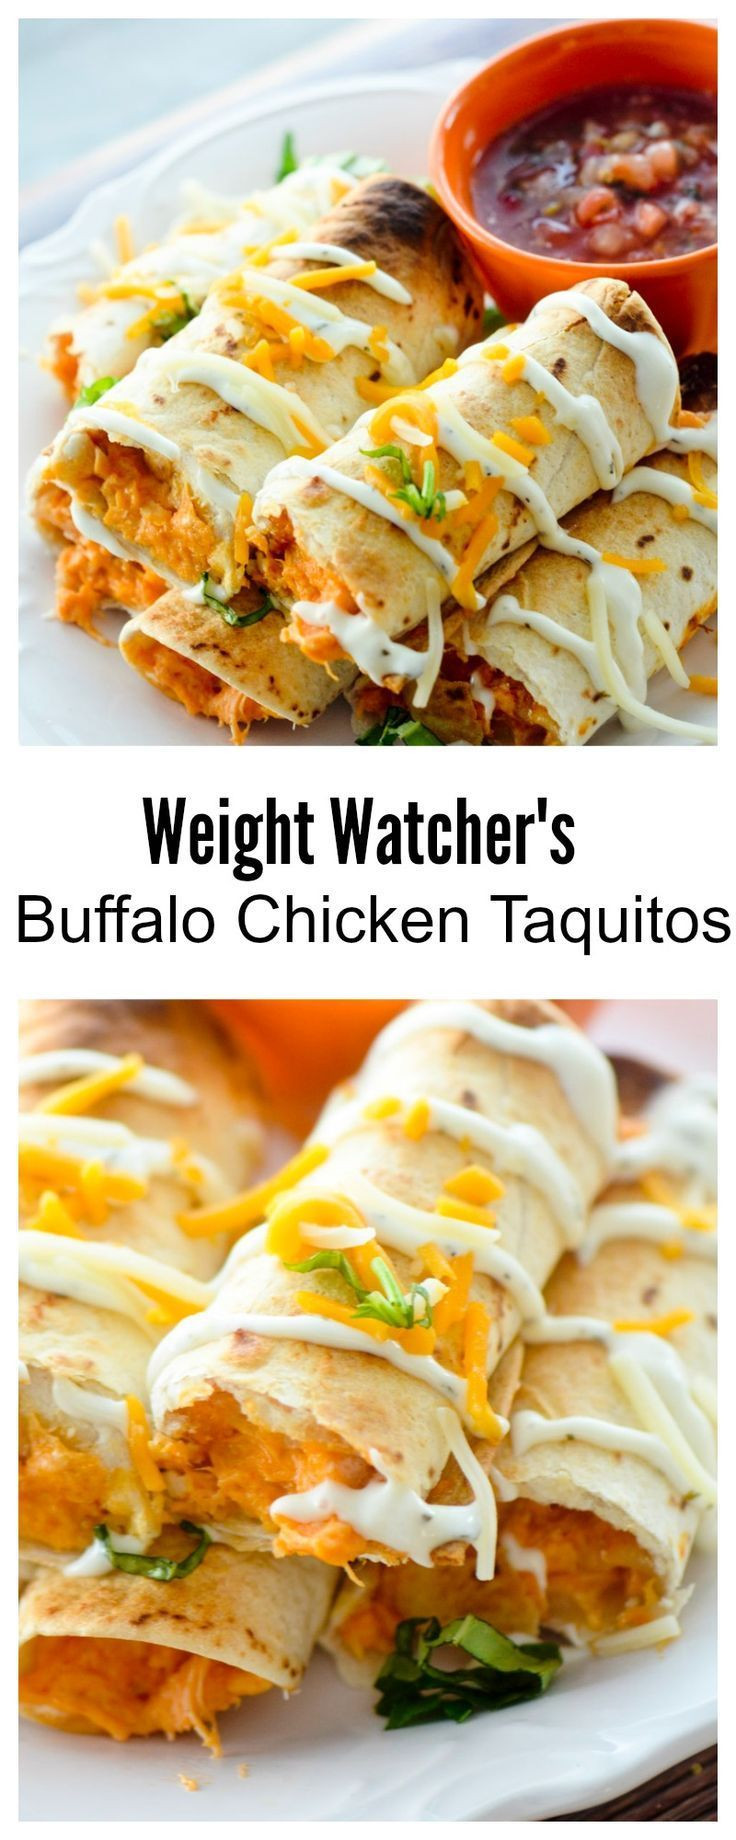 Low Calorie Baked Chicken Recipes
 100 Low Calorie Chicken Recipes on Pinterest